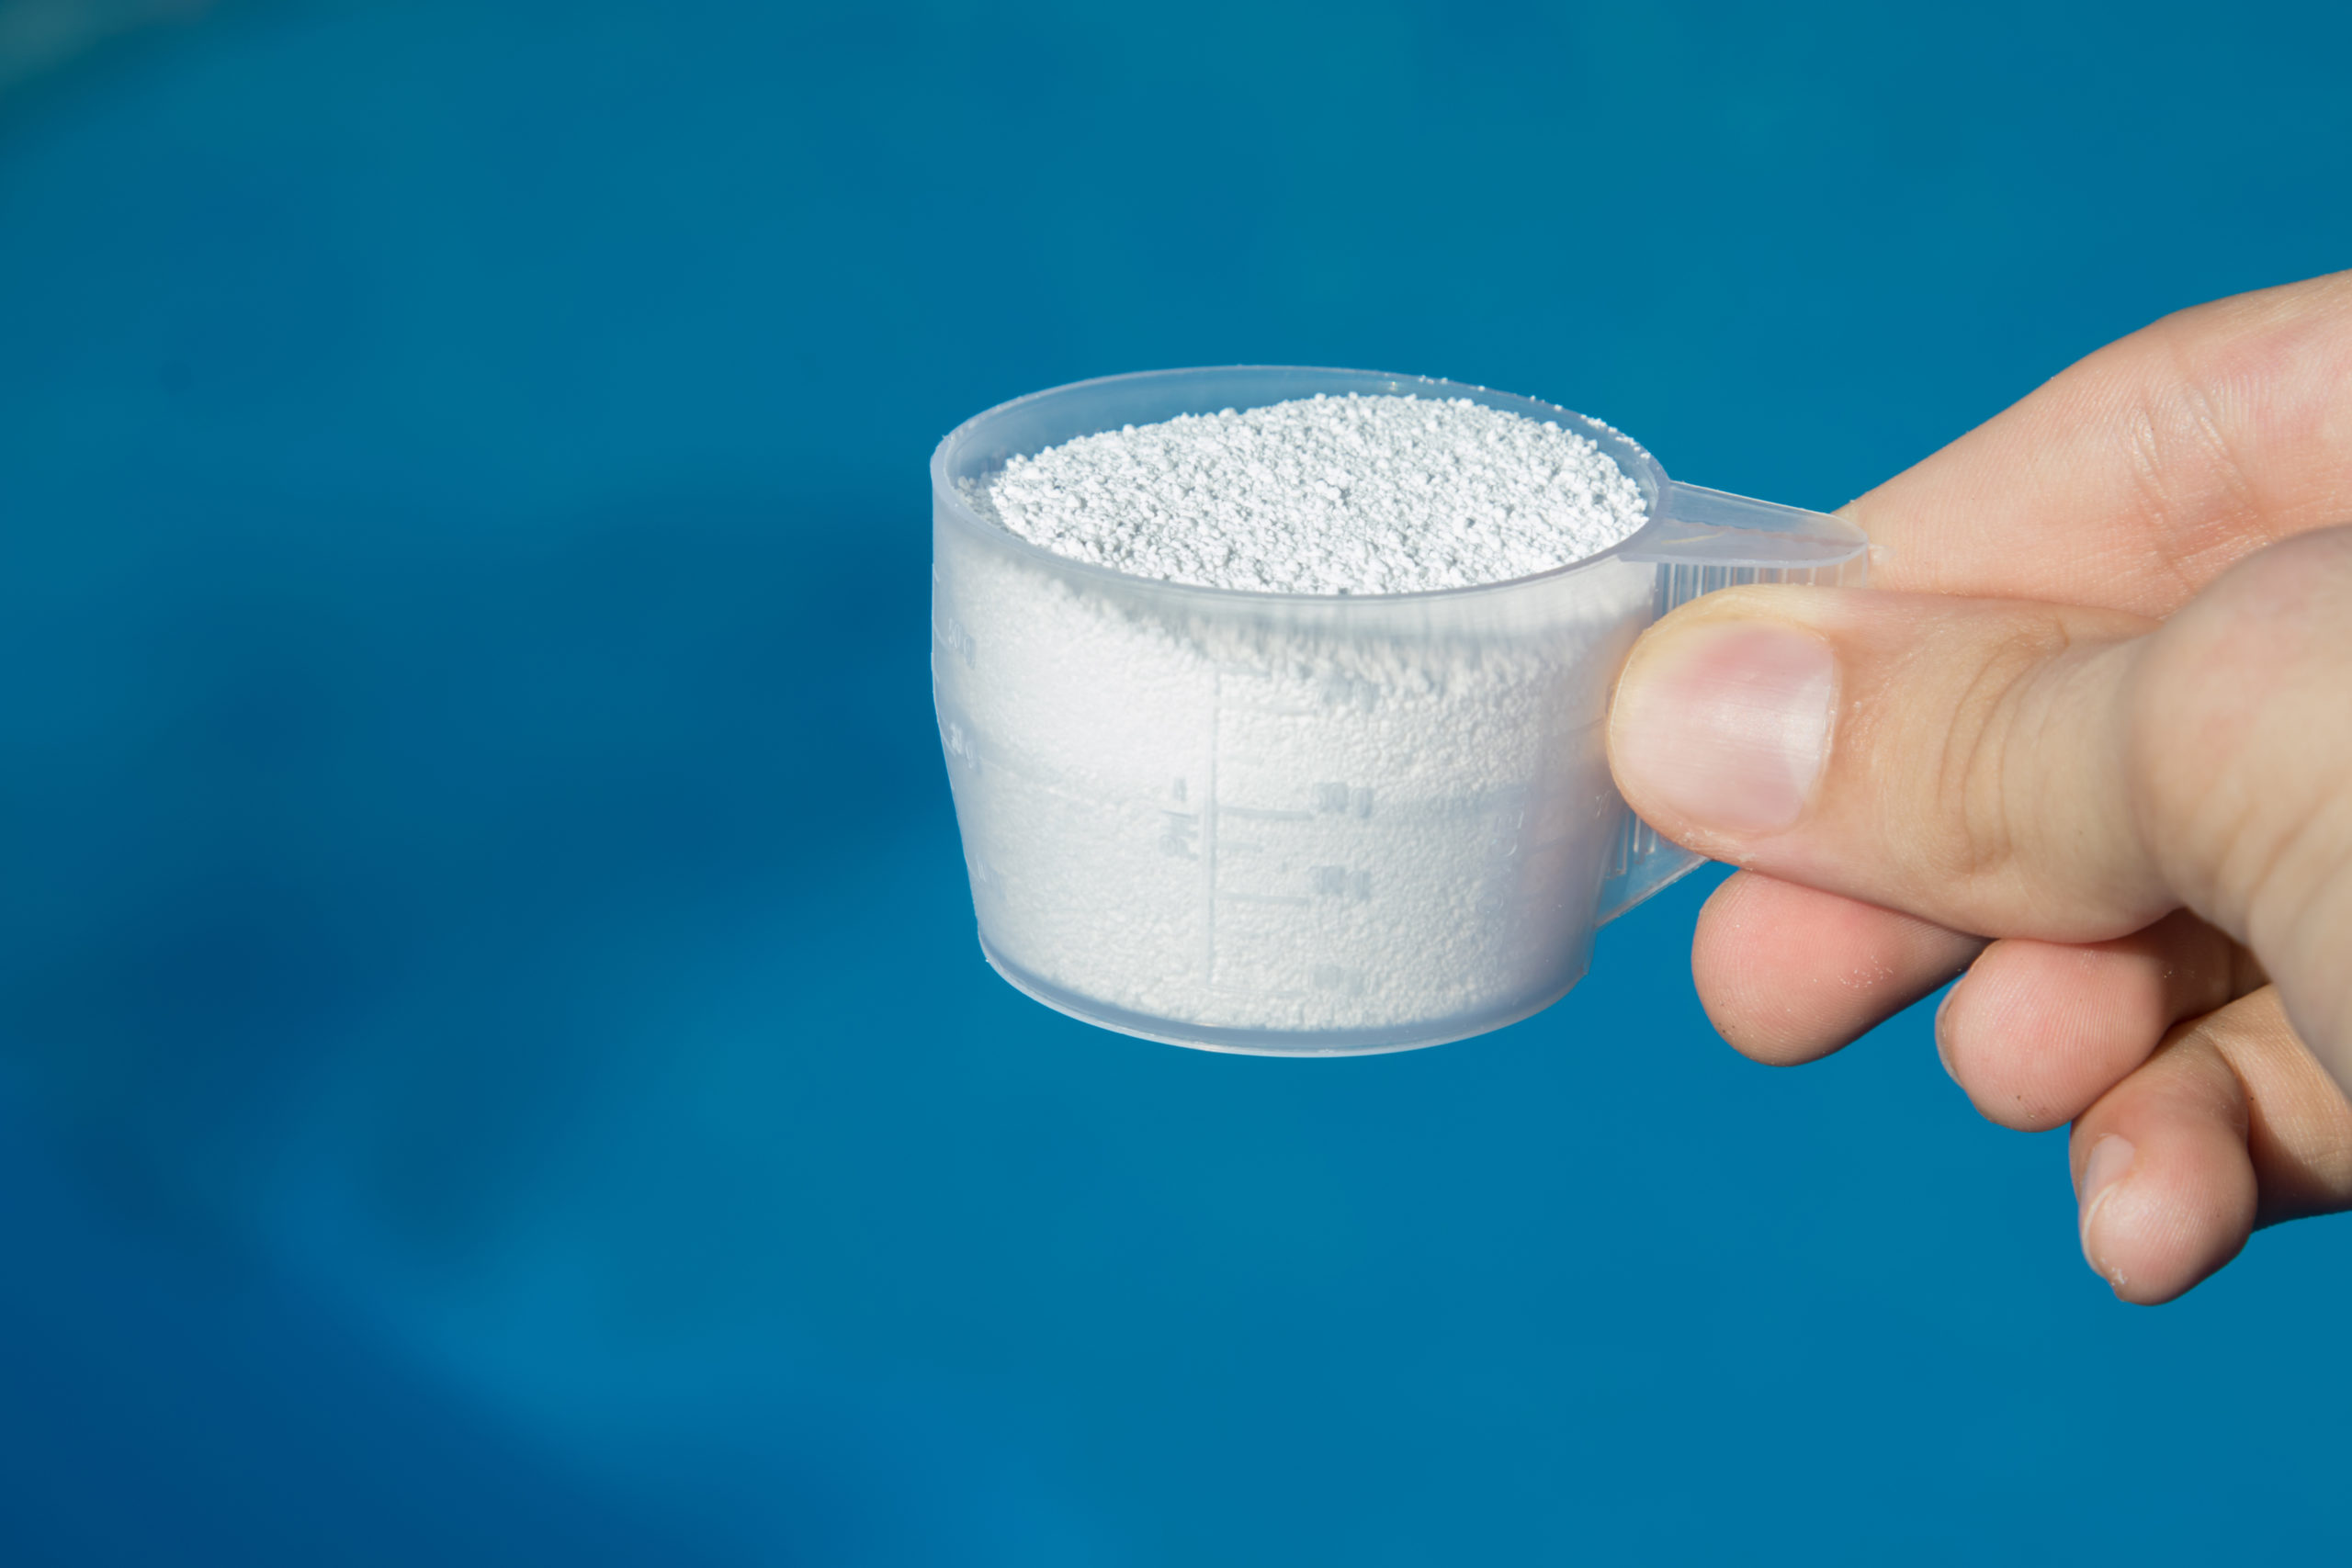 A small cup containing chlorine granules, typically used for pool water treatment and disinfection.